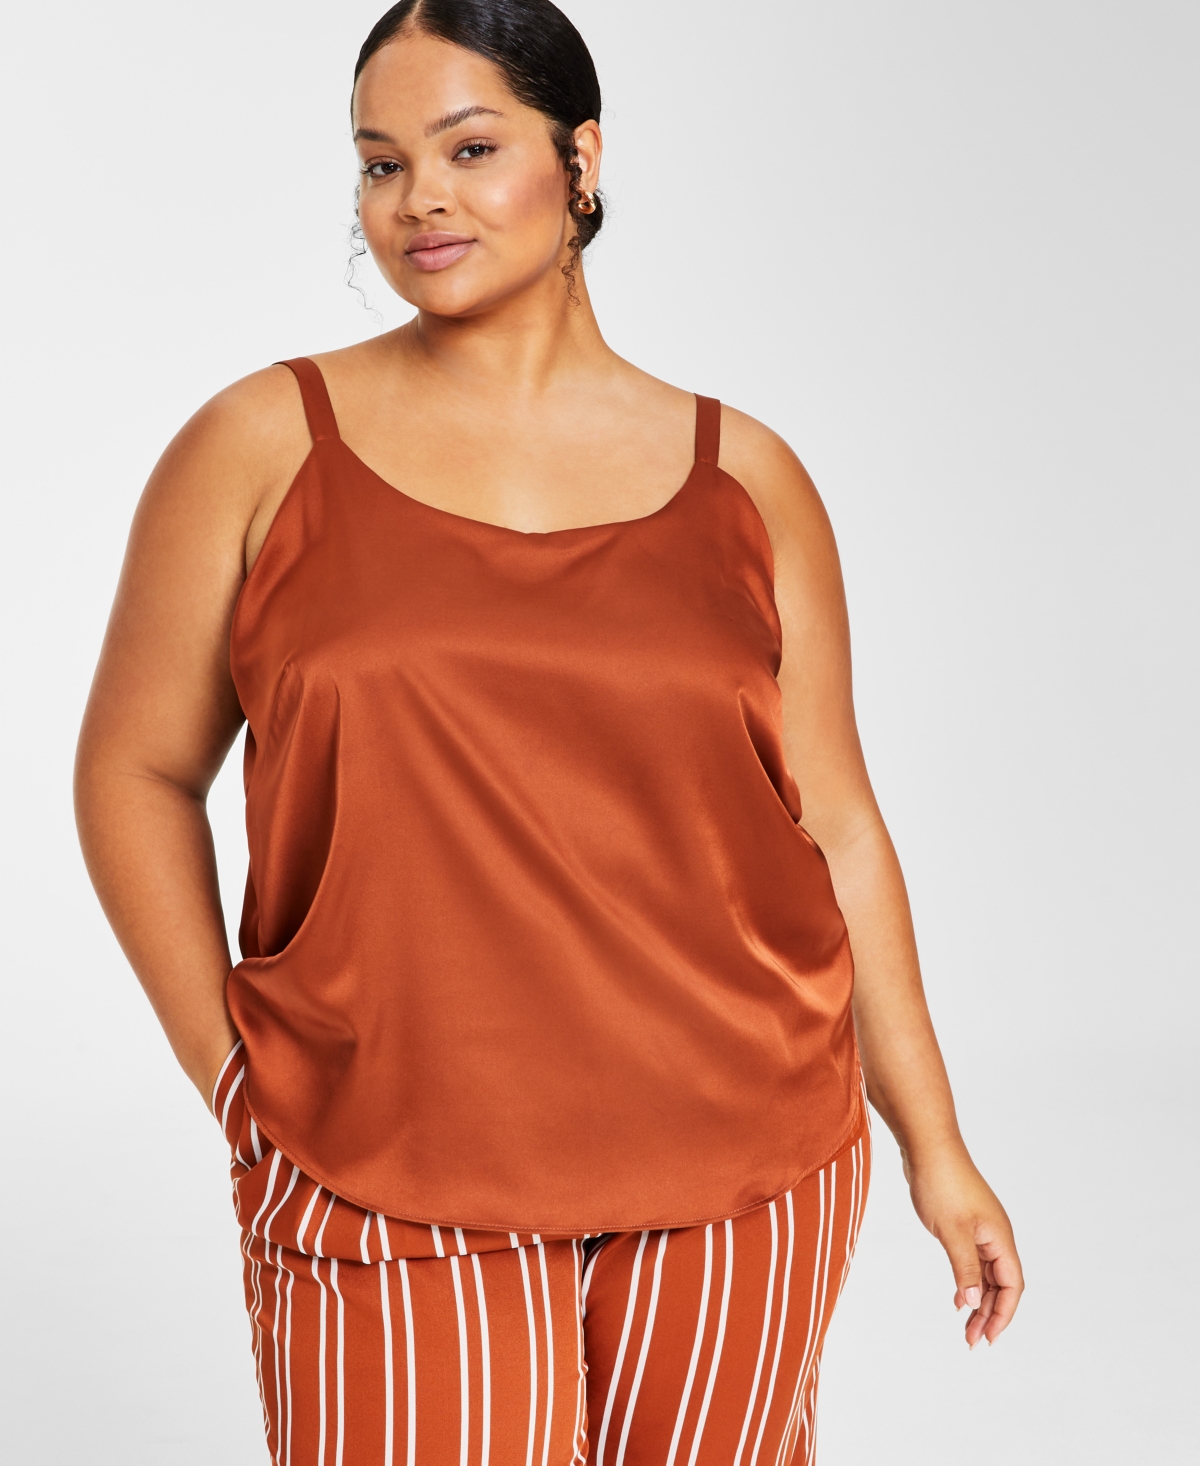 Bar Iii Plus Size Scoop-Neck Satin Camisole, Created for Macy's